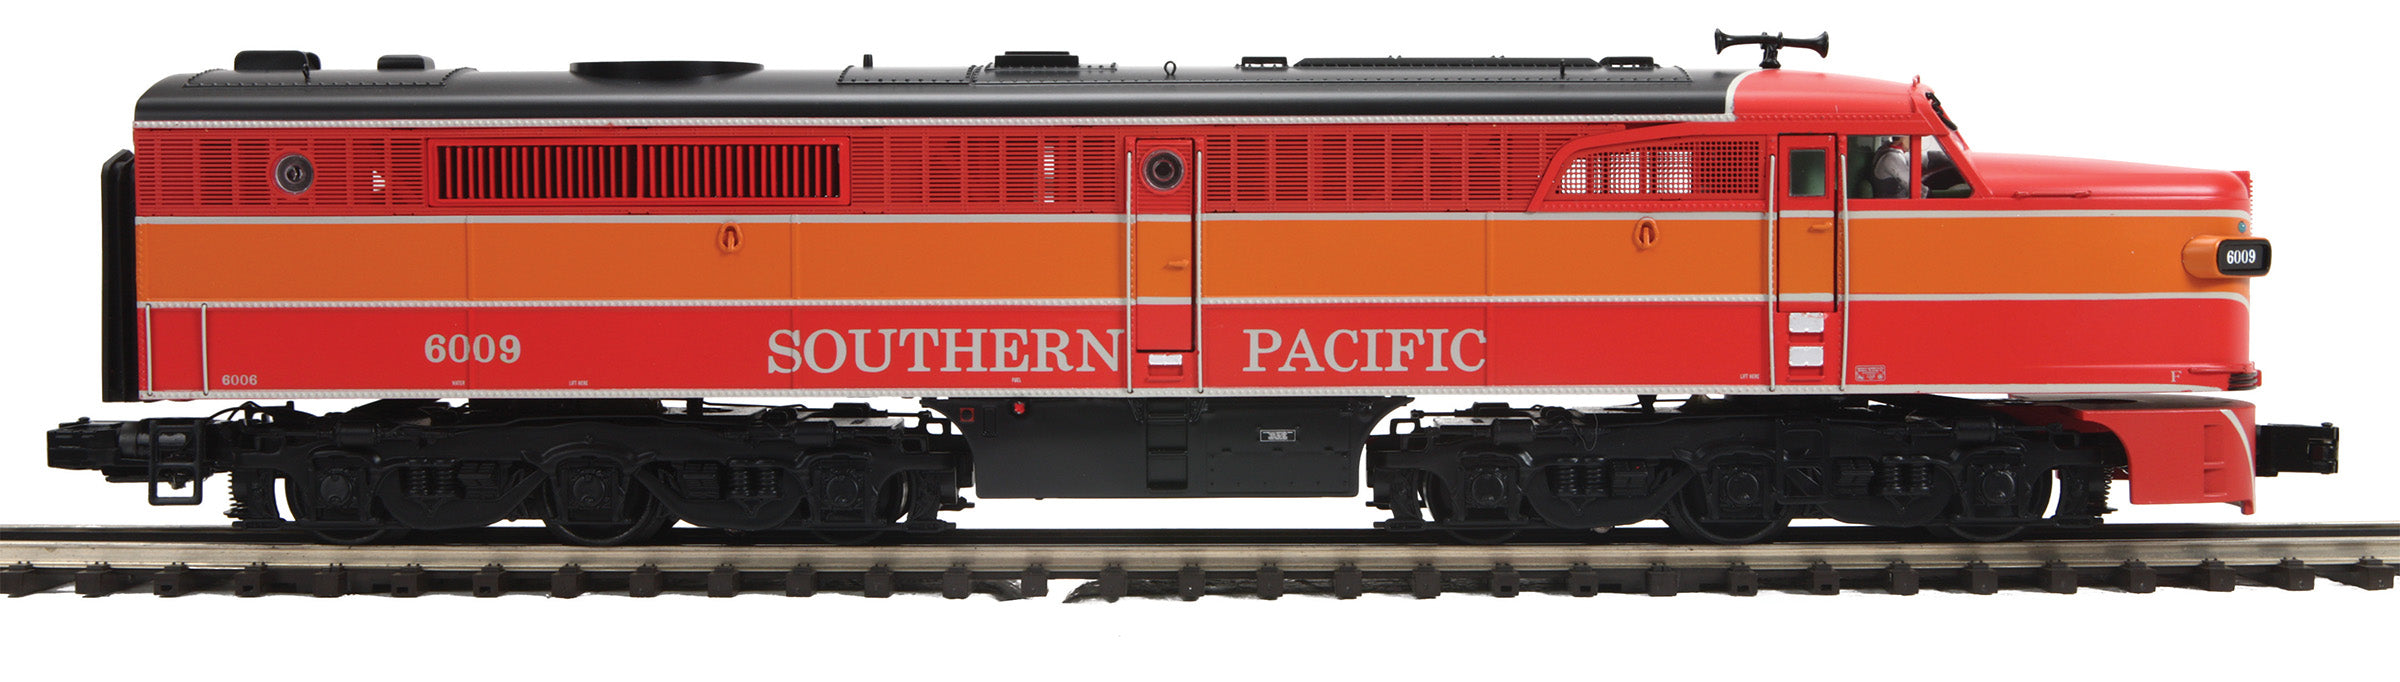 MTH 20-21868-1 - Alco PA A Unit Diesel Locomotive "Southern Pacific" #6009 w/ PS3 (Daylight)